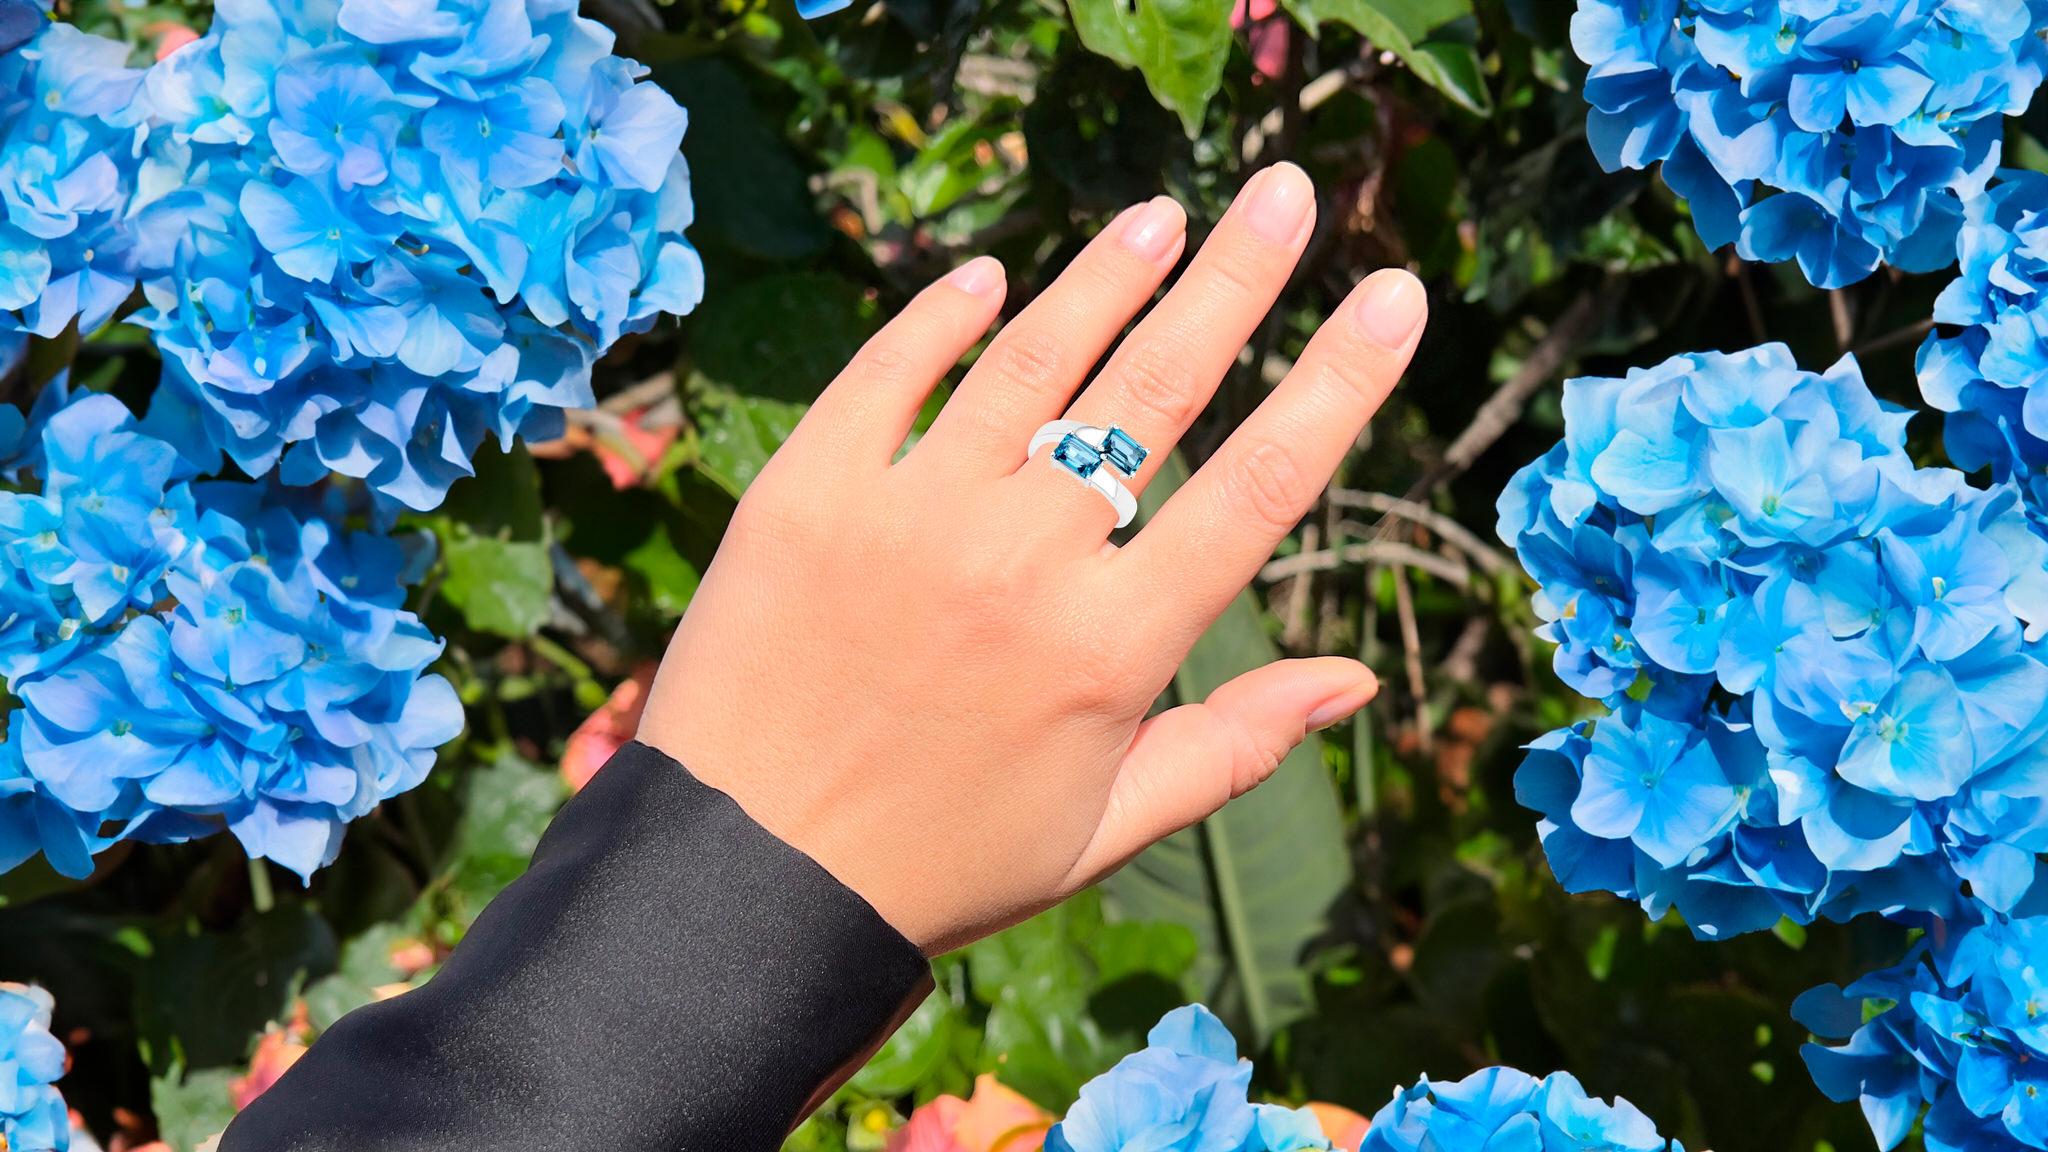 It comes with the Gemological Appraisal by GIA GG/AJP
All Gemstones are Natural
2 London Blue Topazes = 2.44 Carats
Metal: Rhodium Plated Sterling Silver
Ring Size: 8* US
*It can be resized complimentary